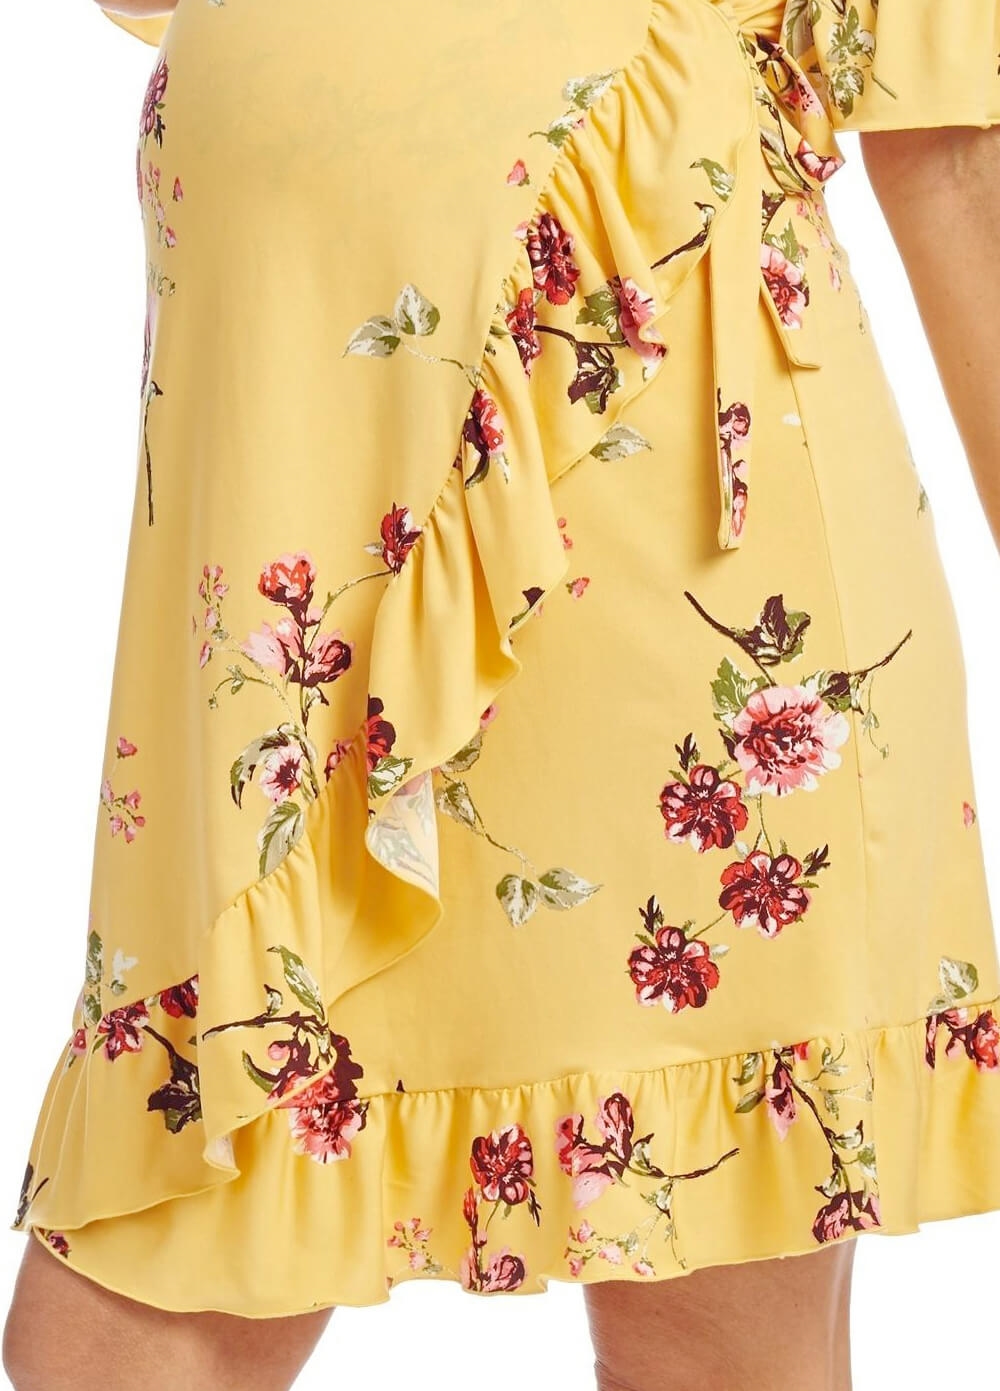 Leilani Nursing Wrap Dress in Yellow Floral by Everly Grey 